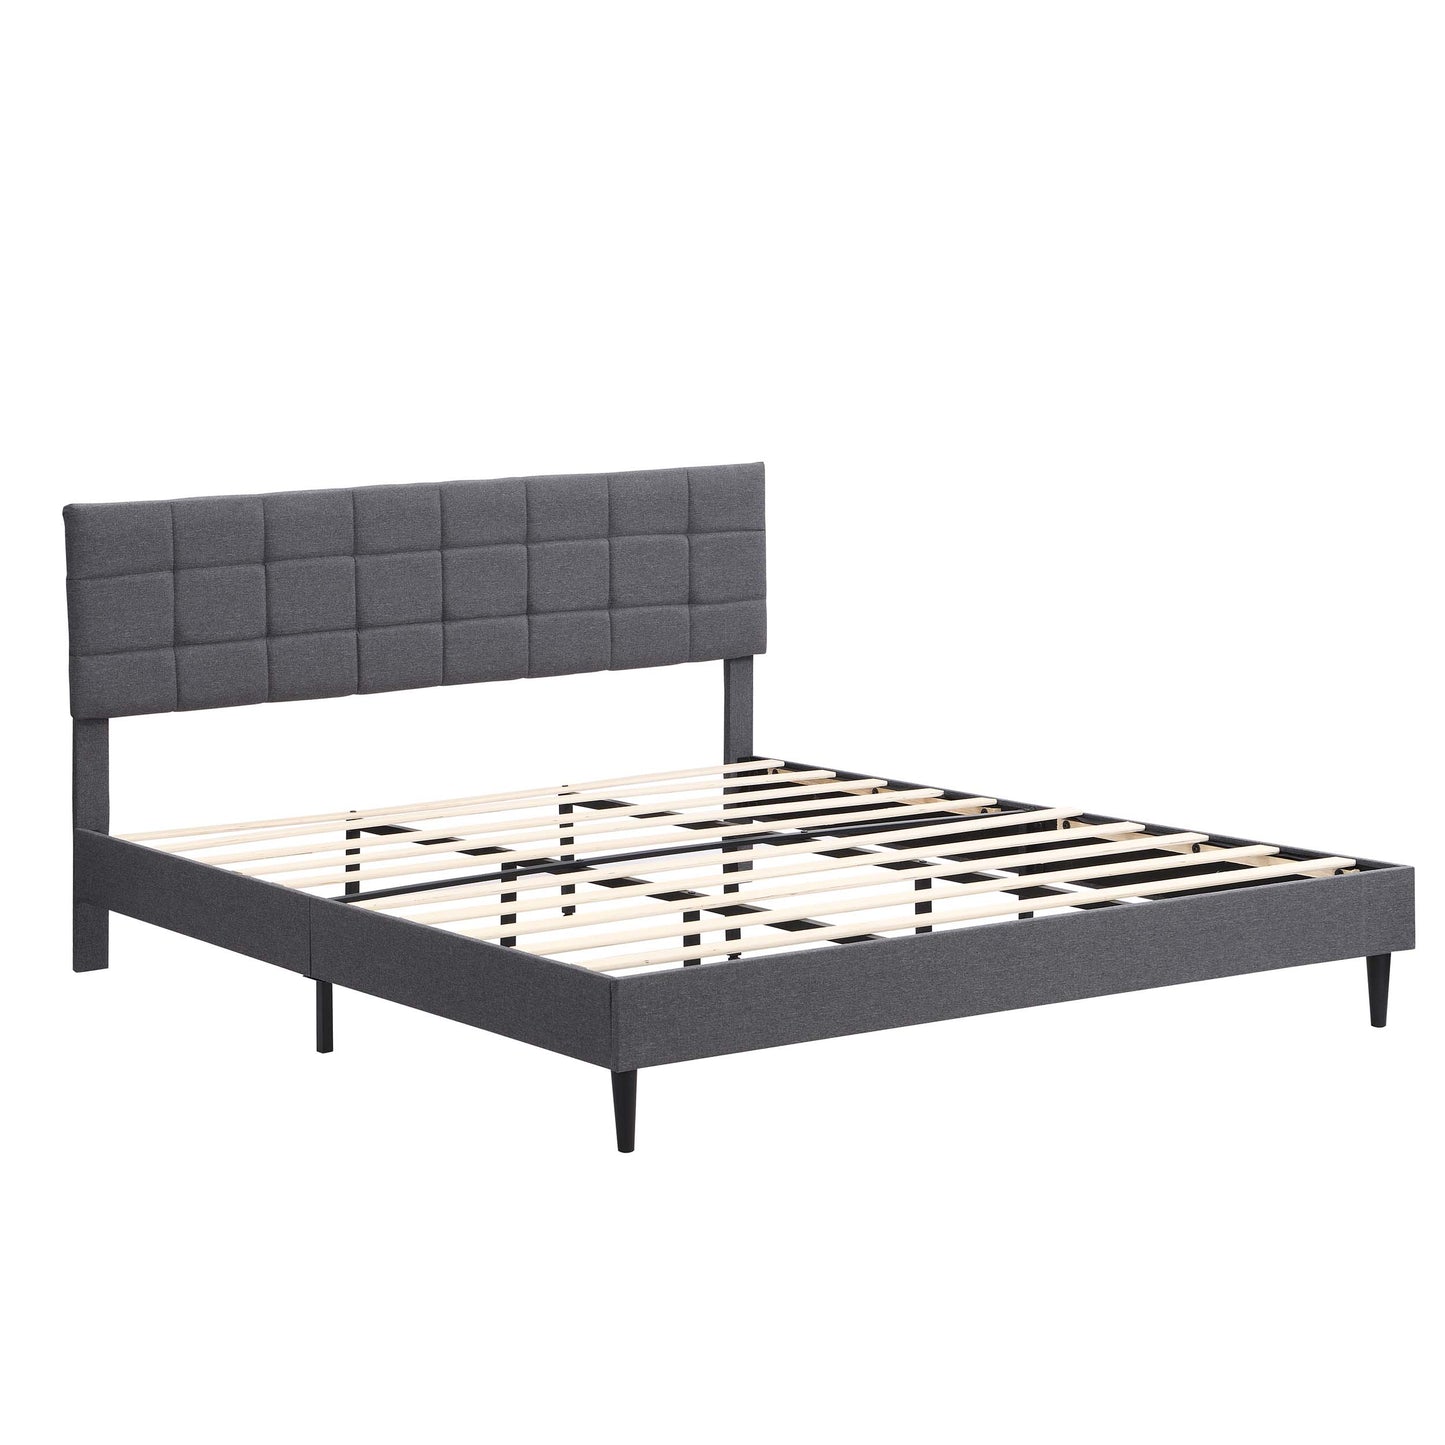 SYNGAR King Size Bed Frame, Modern Upholstered Tufted Platform Bed Frame with Headboard and Strong Support Legs for Bedroom, No Box Spring Needed, Easy Assembly, Dark Gray